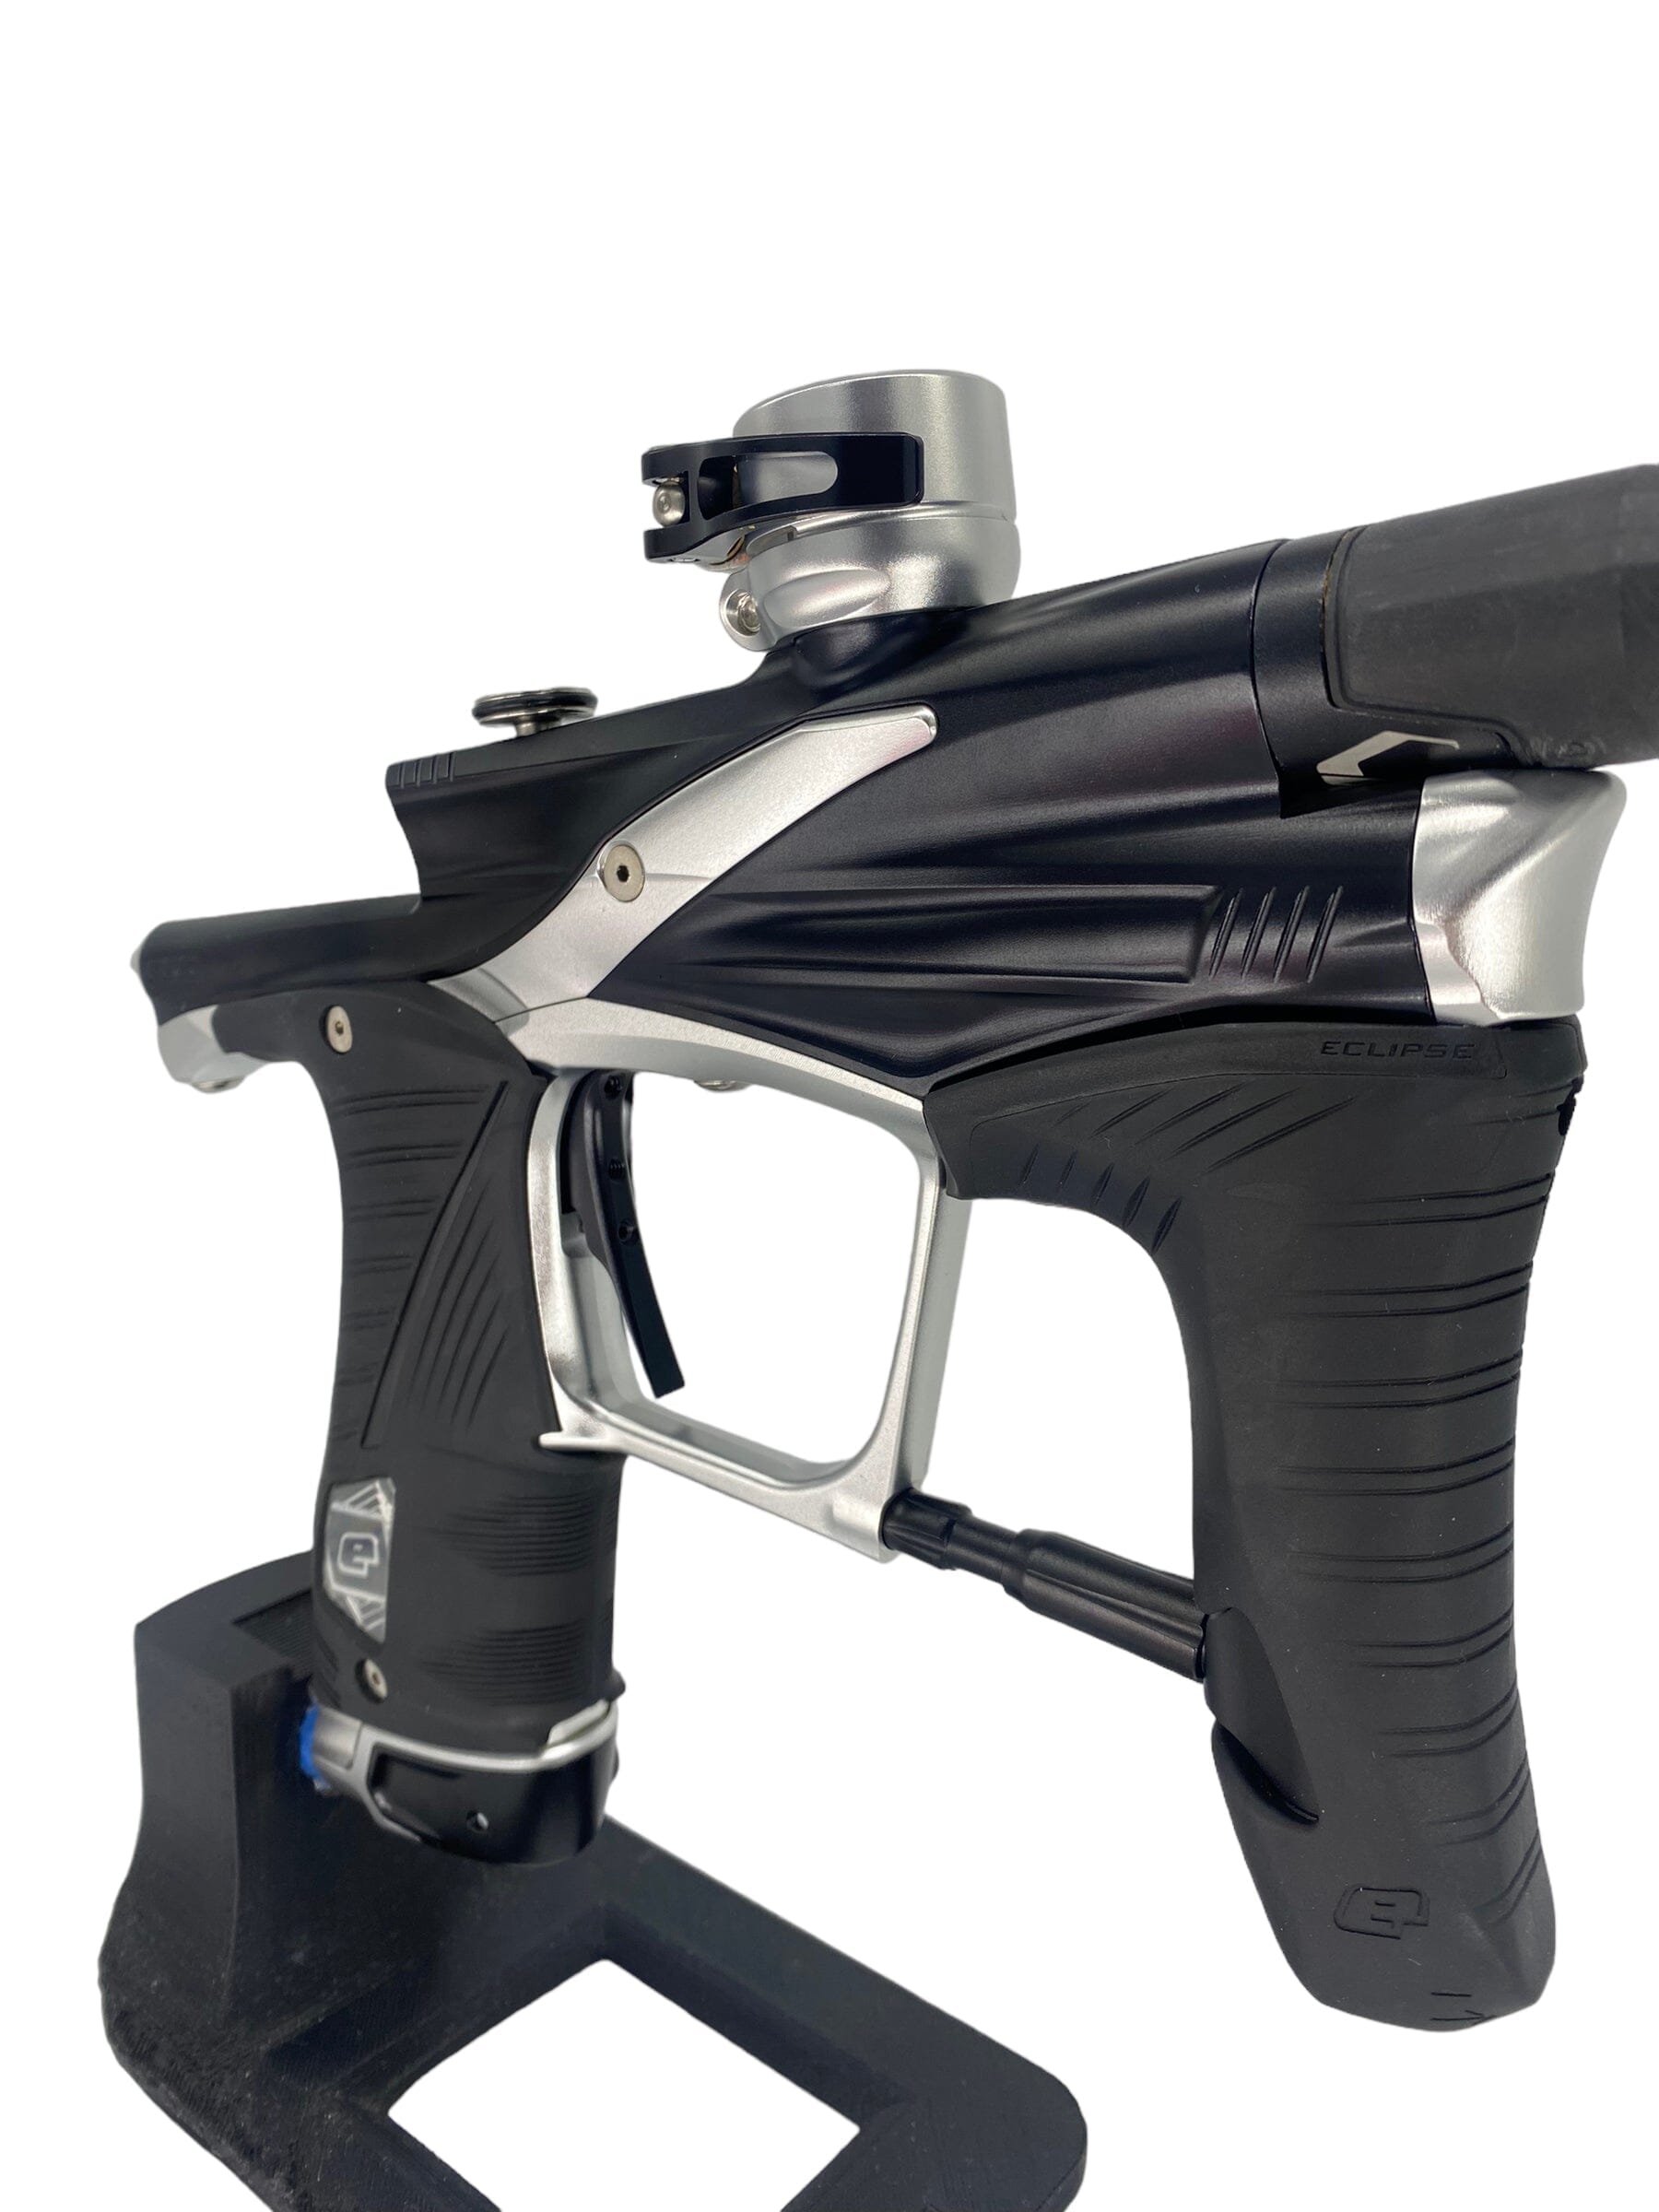 Used Planet Eclipse LV1.6 Paintball Gun from CPXBrosPaintball Buy/Sell/Trade Paintball Markers, Paintball Hoppers, Paintball Masks, and Hormesis Headbands